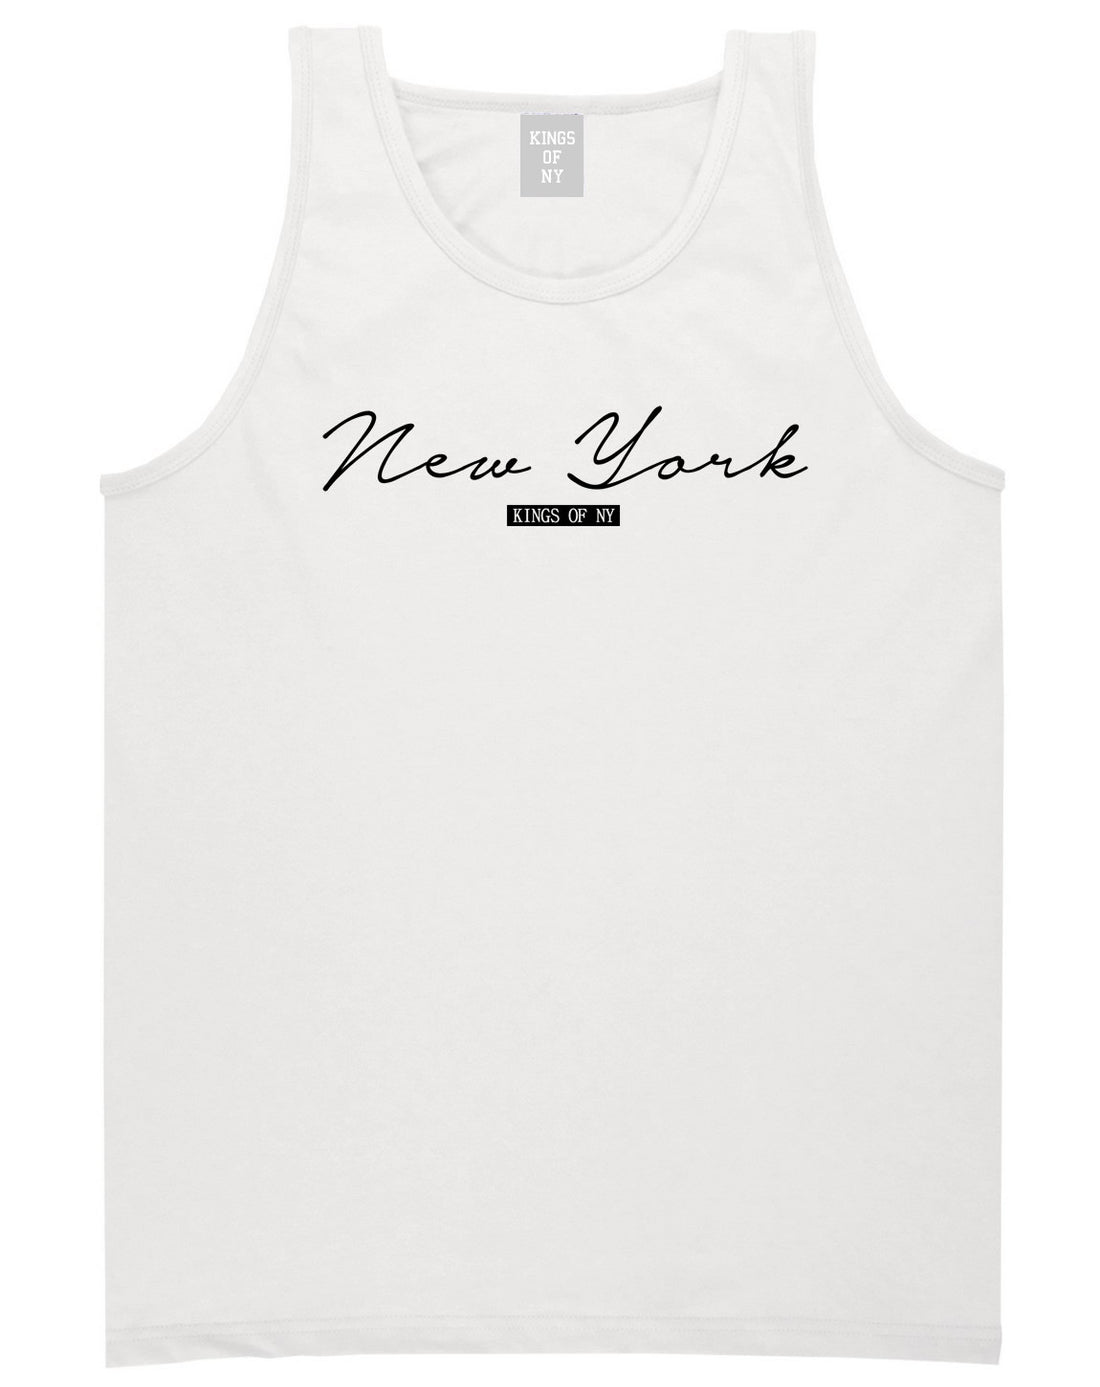 Kings Of NY New York Script Typography Tank Top in White